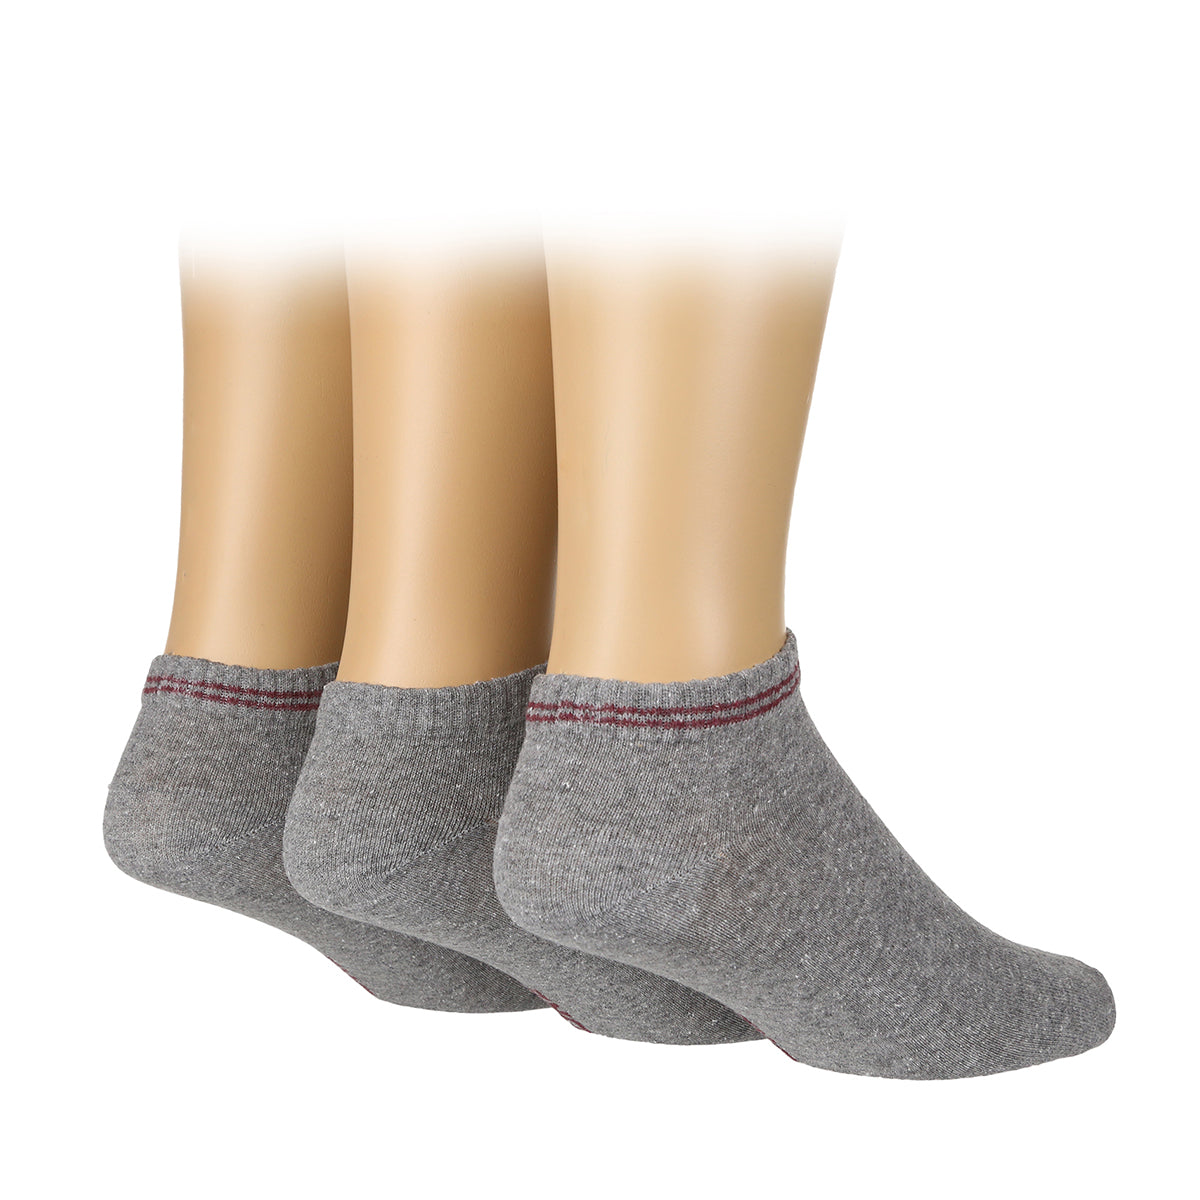 TORE 100% Recycled Men's High Cut Ped Socks - 3 Pairs